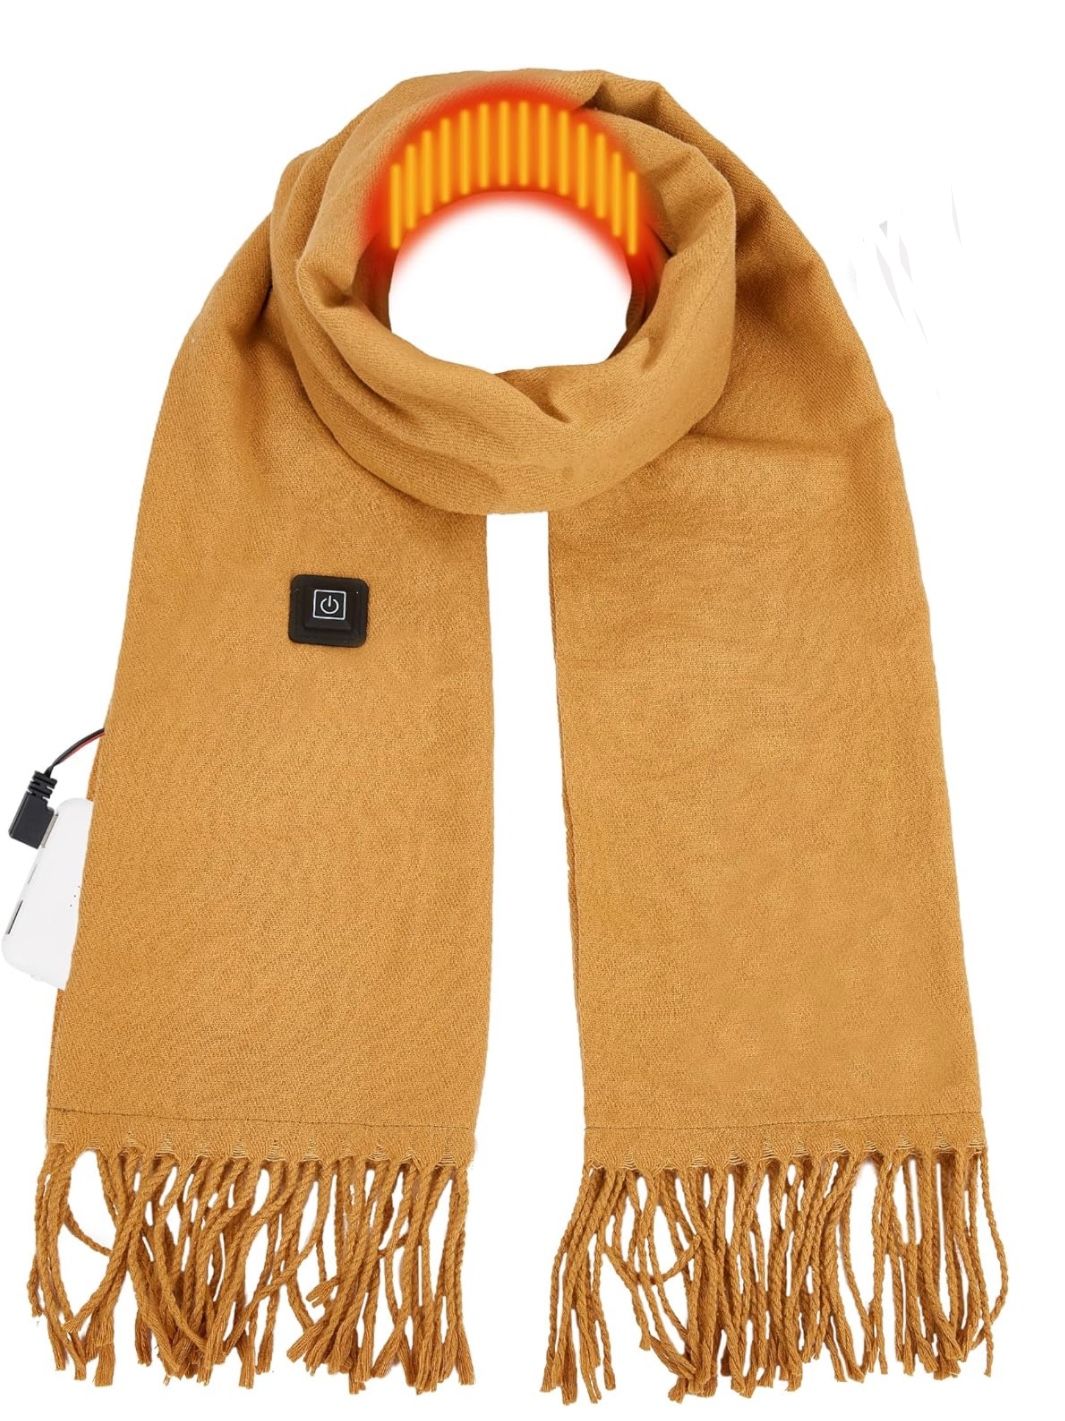 Heated Scarf with Rechargeable Battery Fashion Long Neck Scarfs 3 Levels Temperature Control Washable Warmer (battery not included) open box